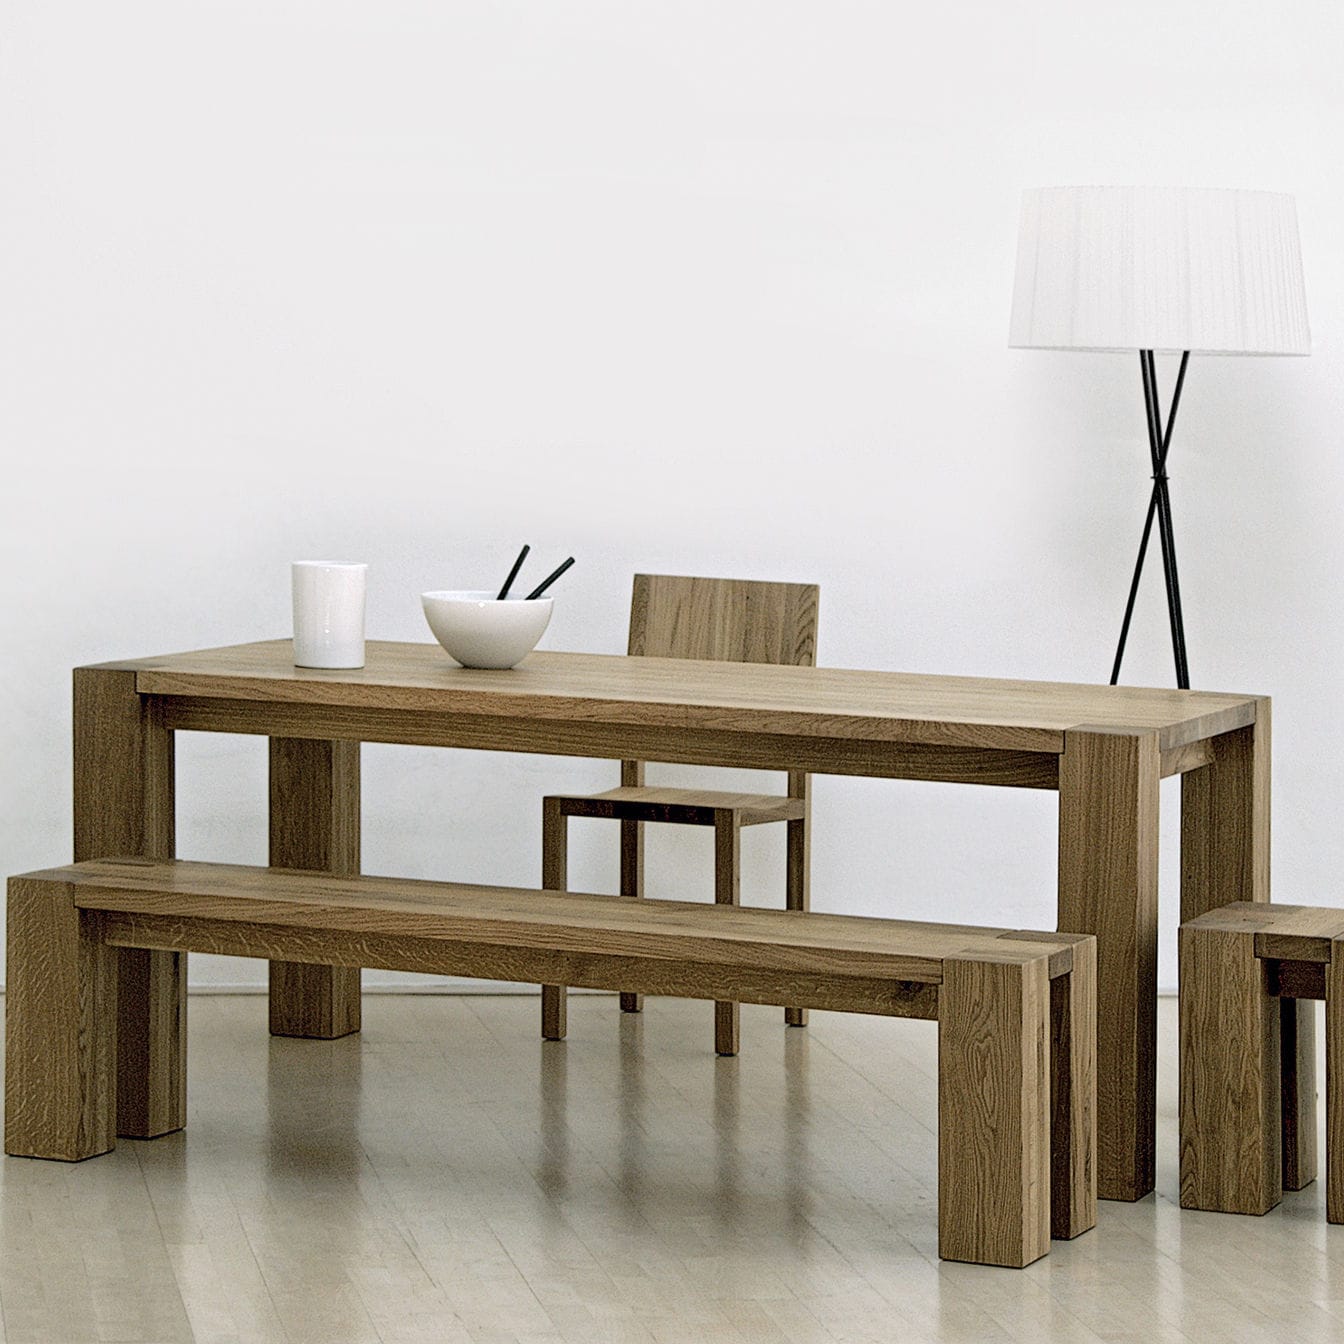 Table bois style scandinave